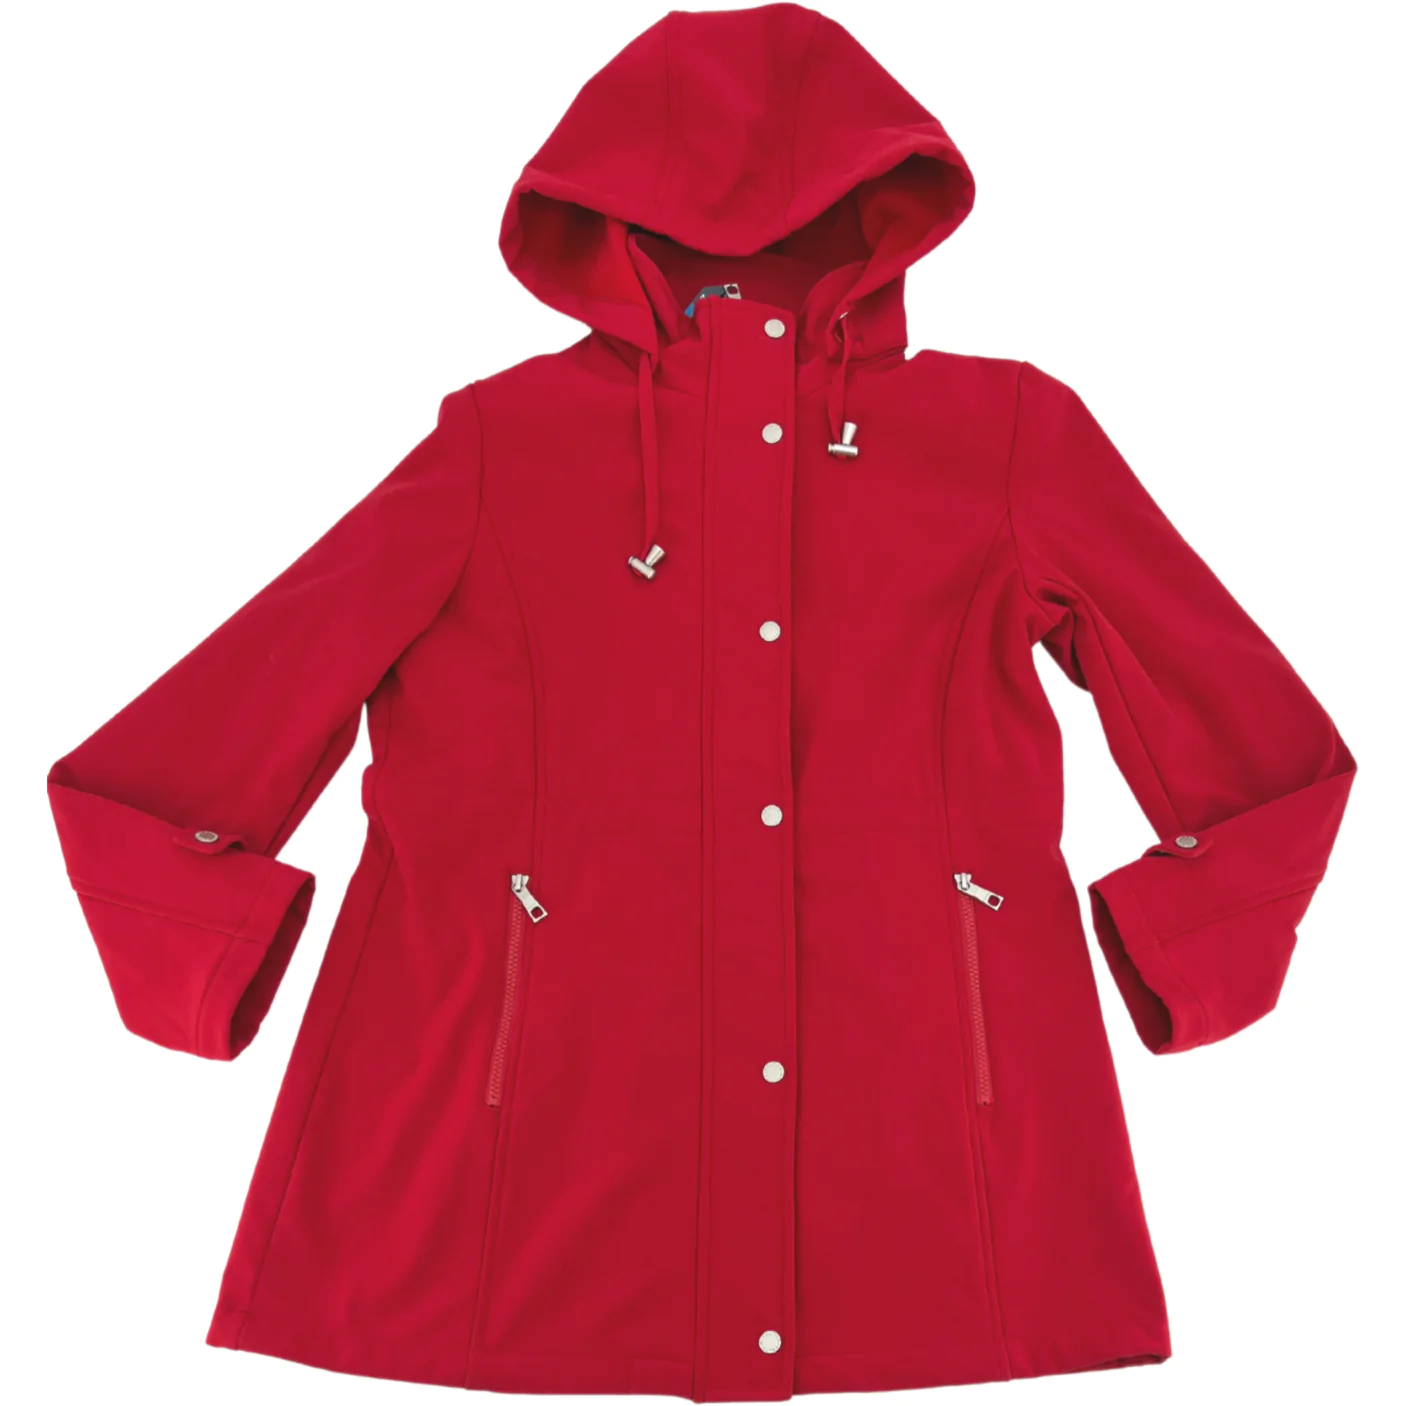 Nautica Women's Performance Jacket: Red / Woman's Coat / Water Resistant / Various Sizes